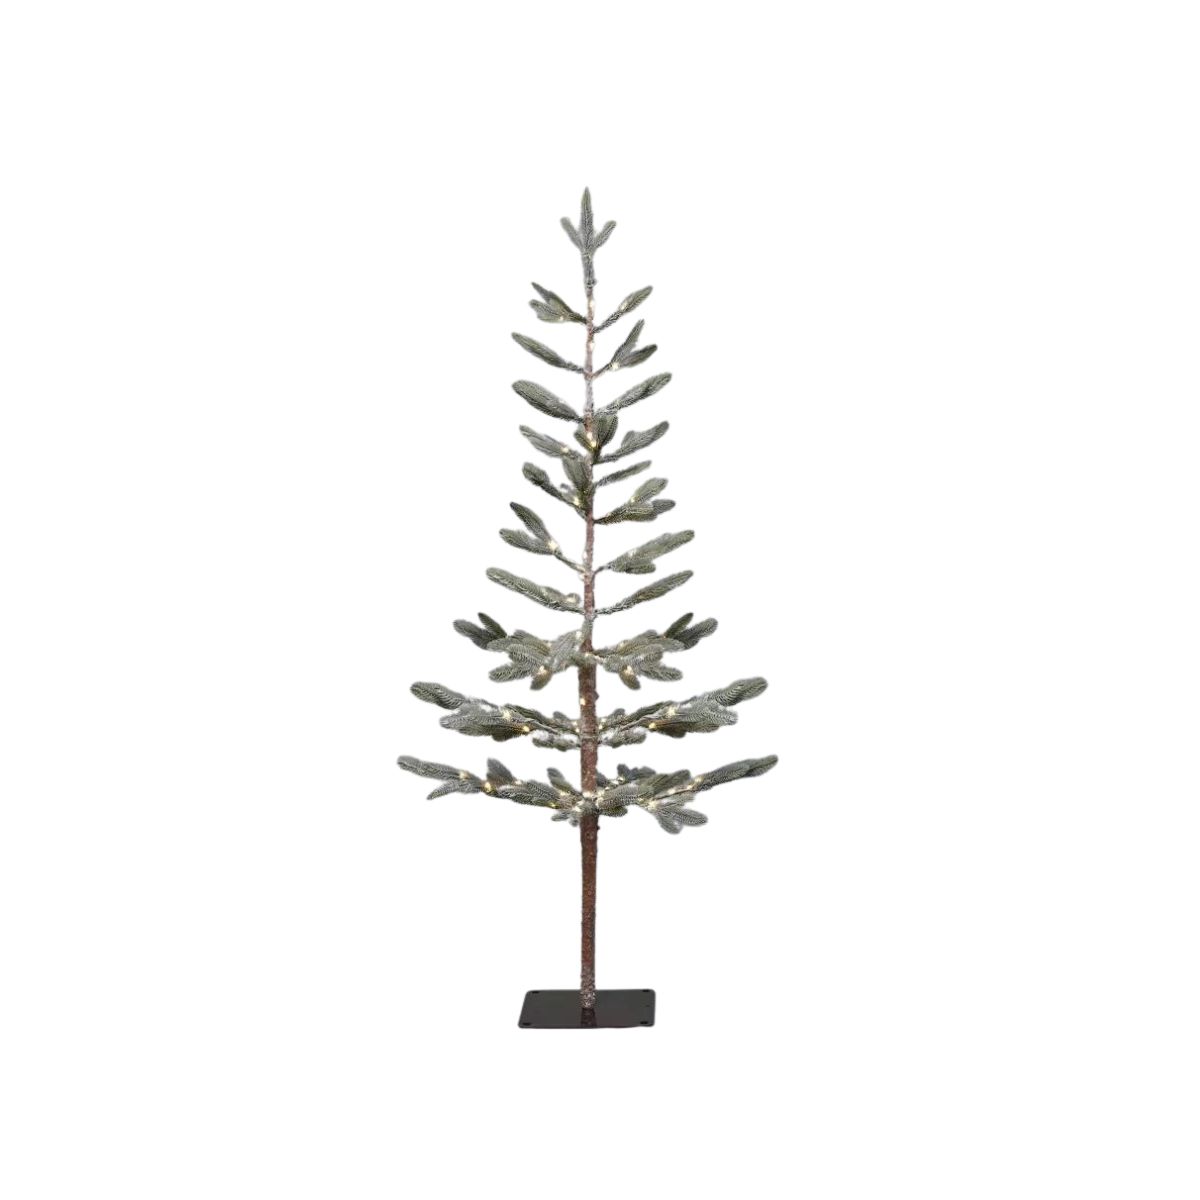 Sparse Christmas Tree Shopping and Decorating Guide | Julie Blanner